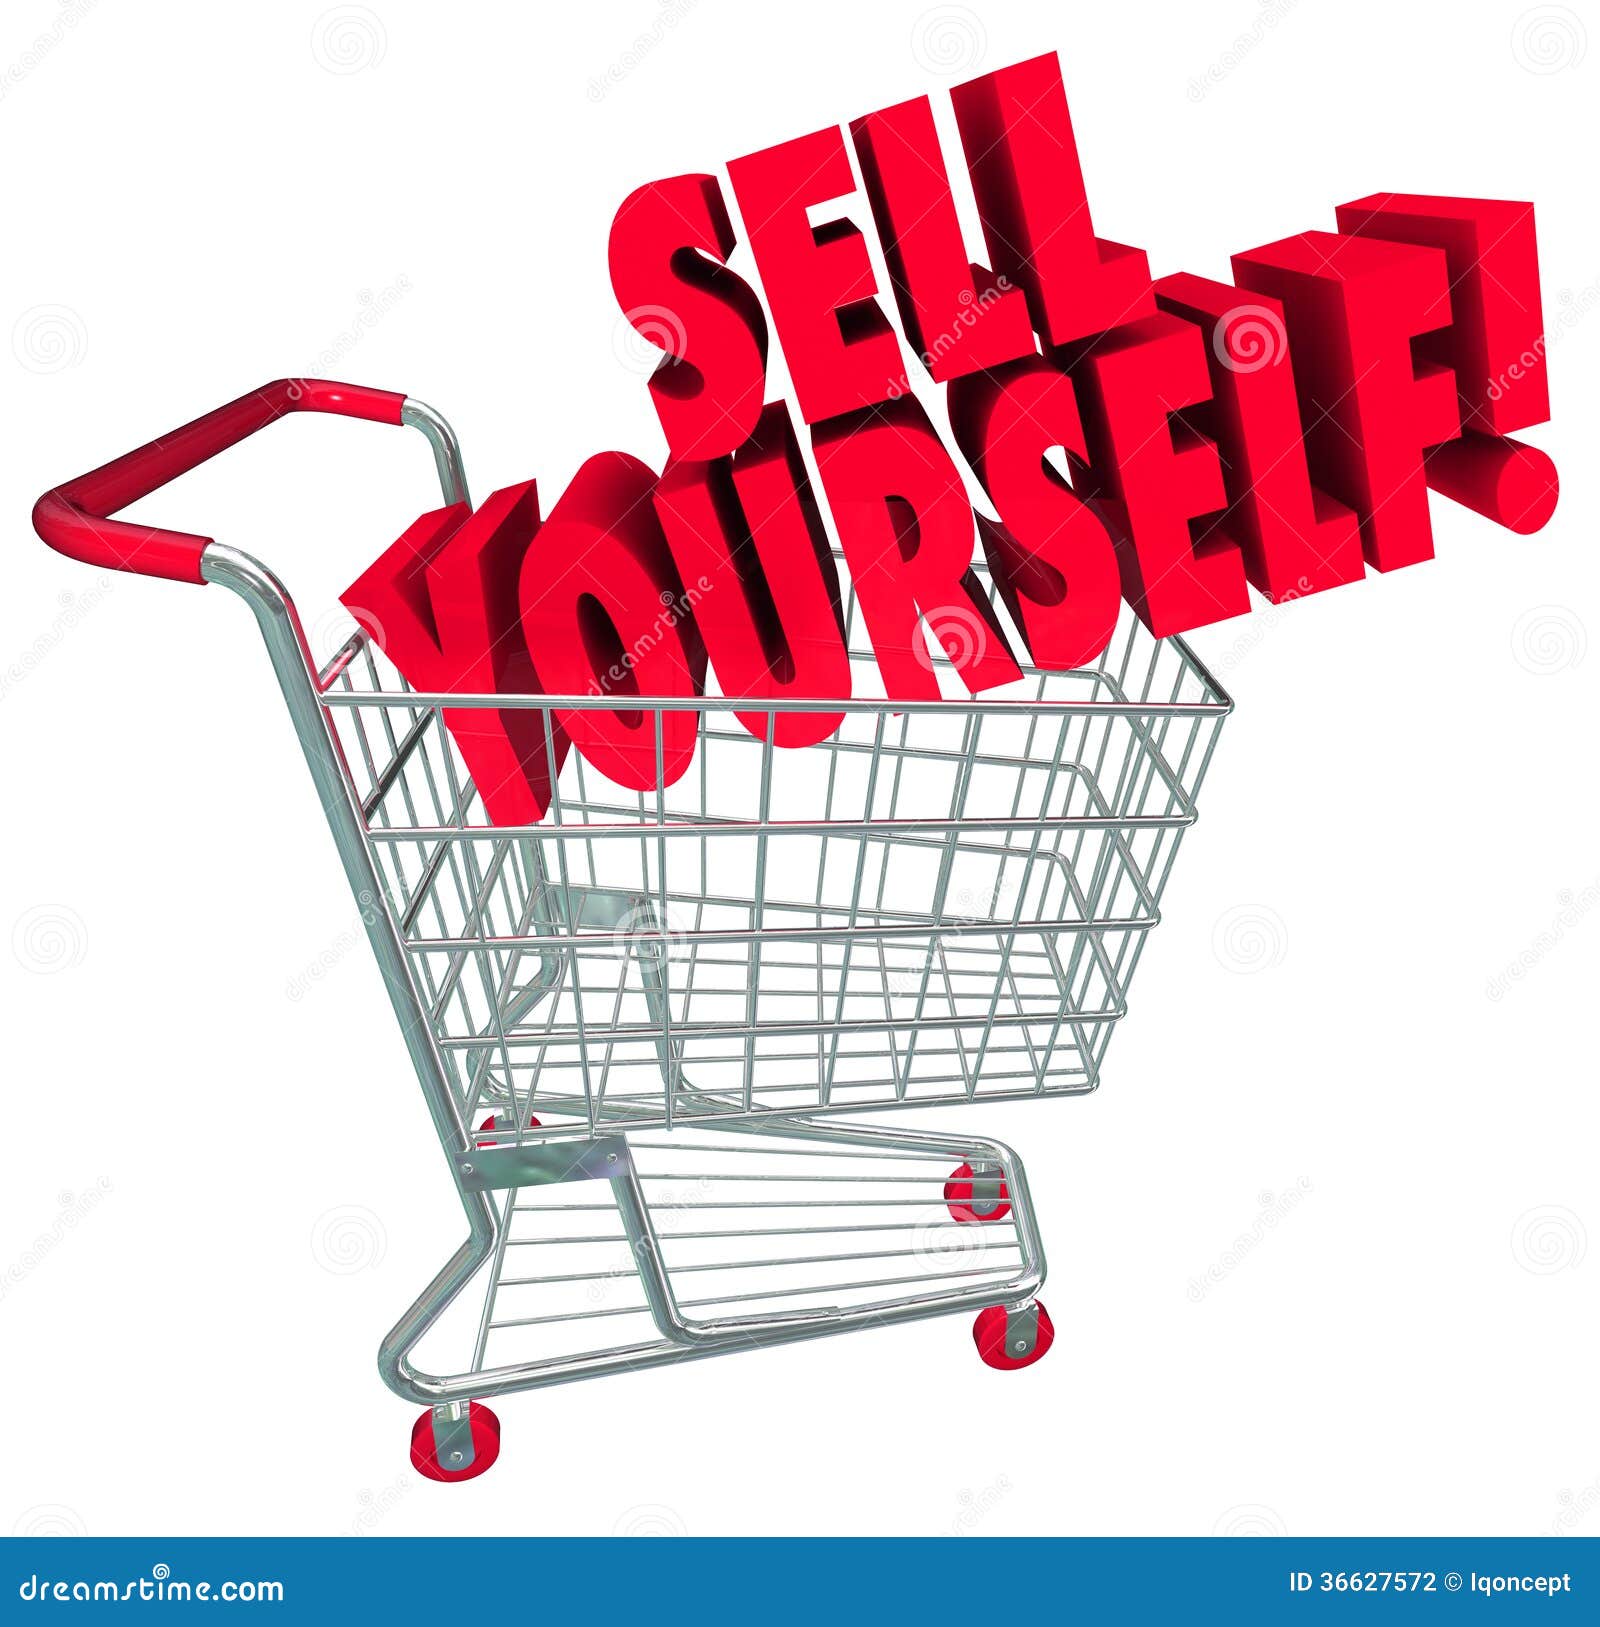 sell yourself shopping cart market your abilities skills